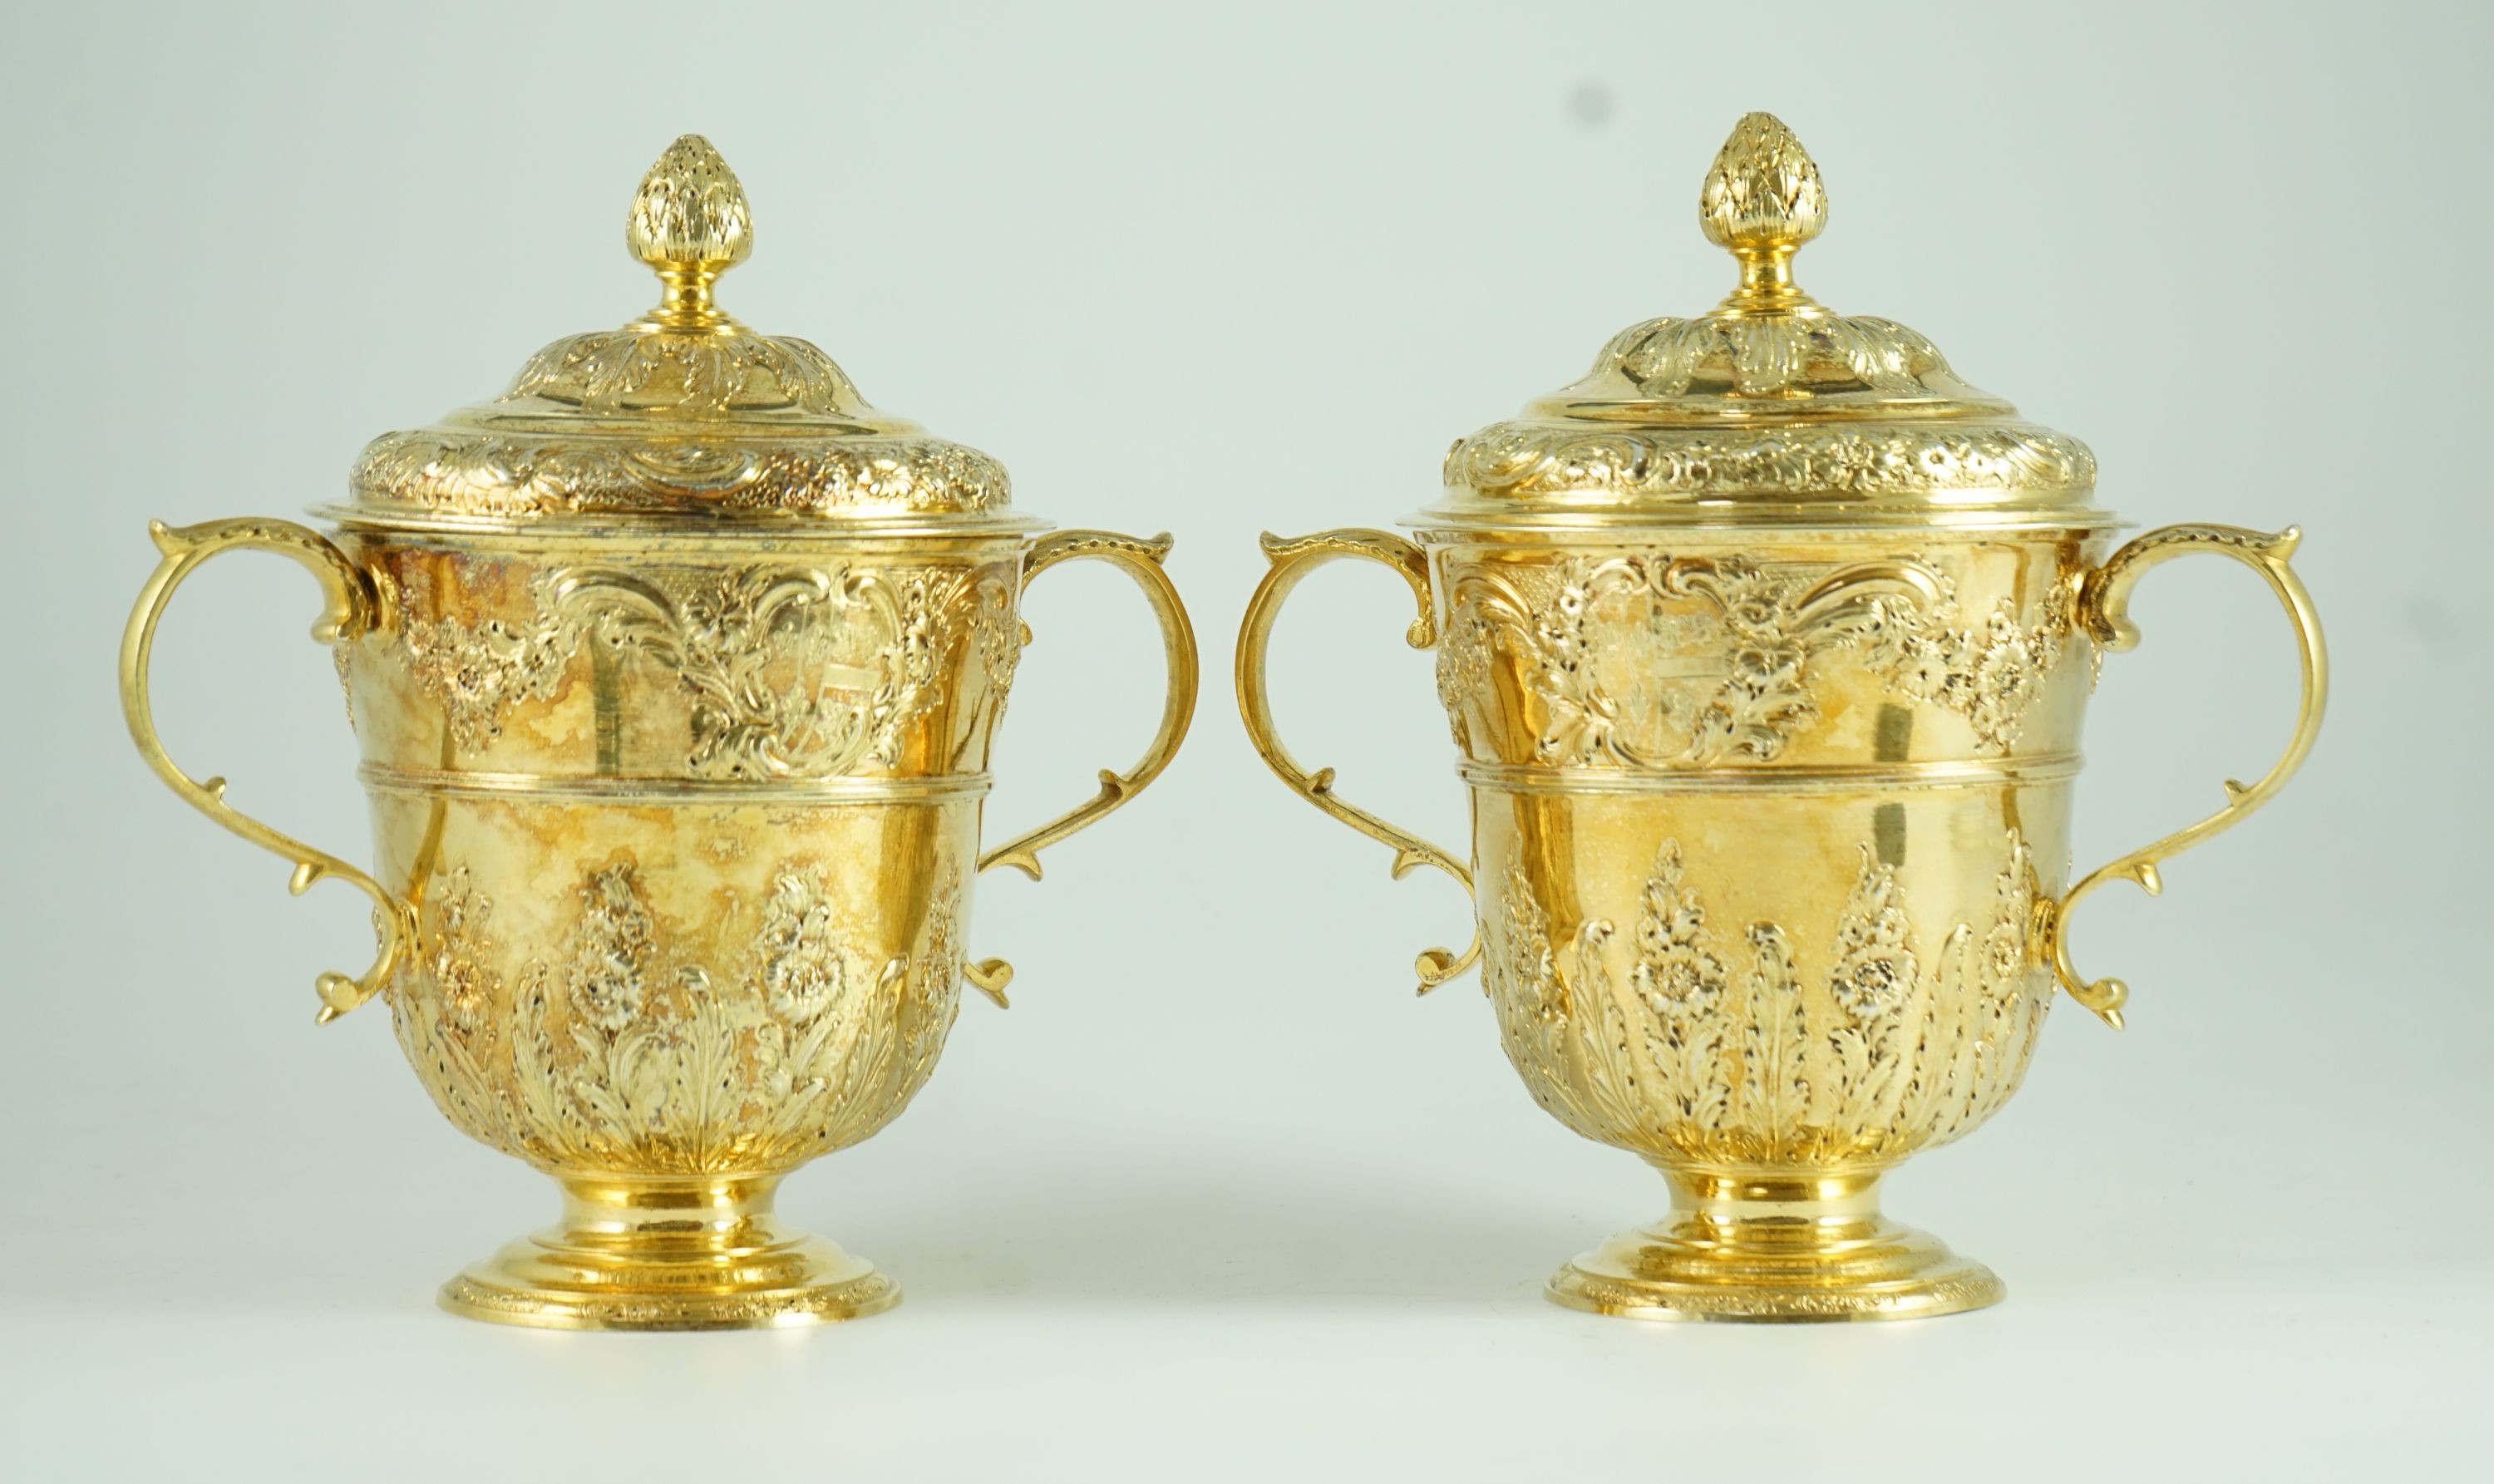 A good pair of George II embossed silver gilt two handled pedestal cups and covers, by Benjamin Gignac